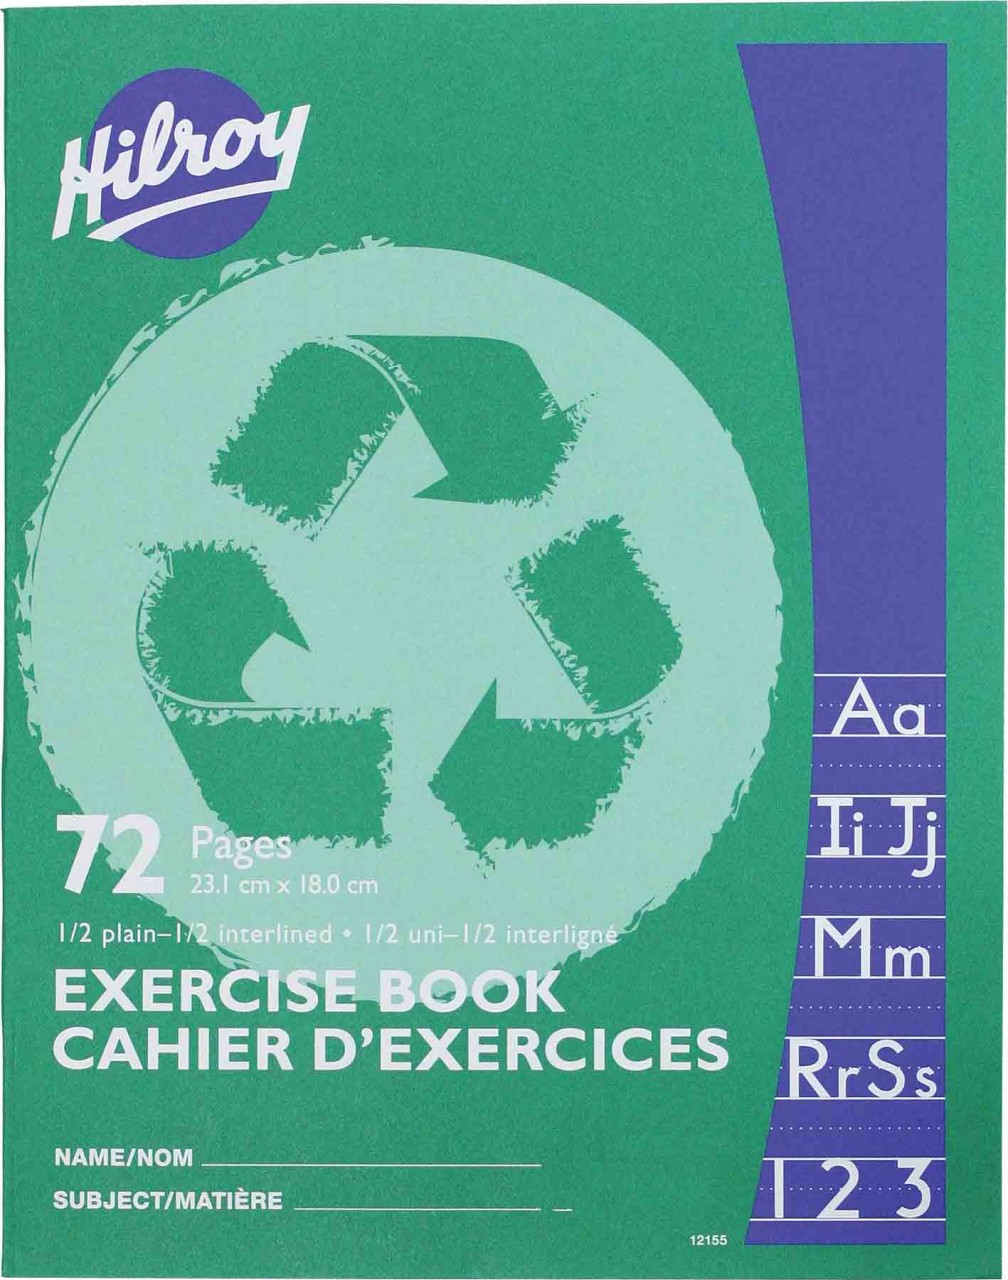 Hilroy 12155 Exercise Books 1/2 Interlined (72pgs) - 7" x 9"